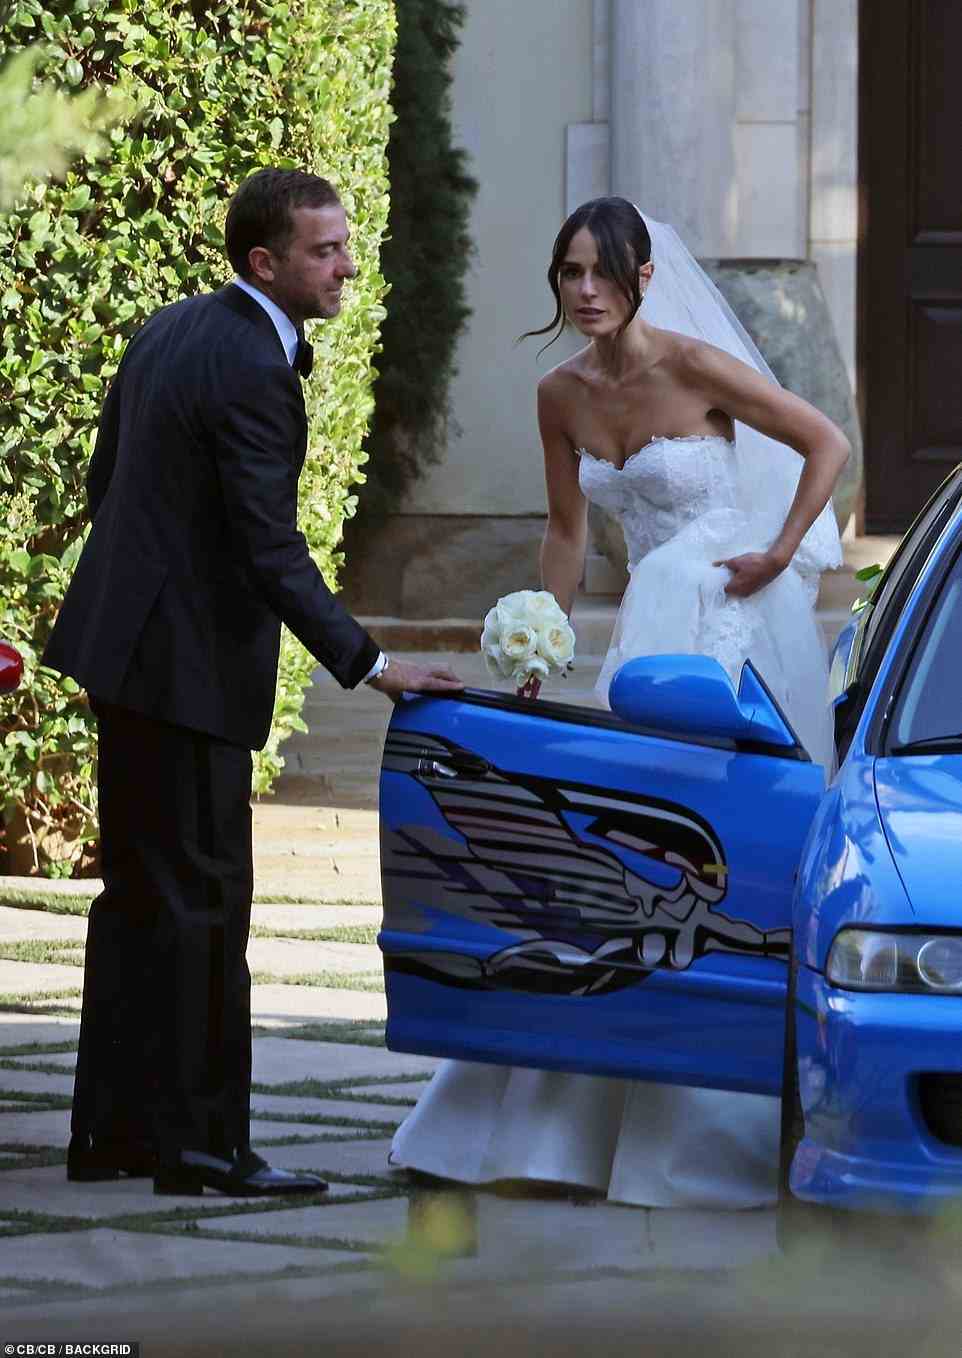 Iconic car: The bride got into a blue featured in many of the Fast & Furious films